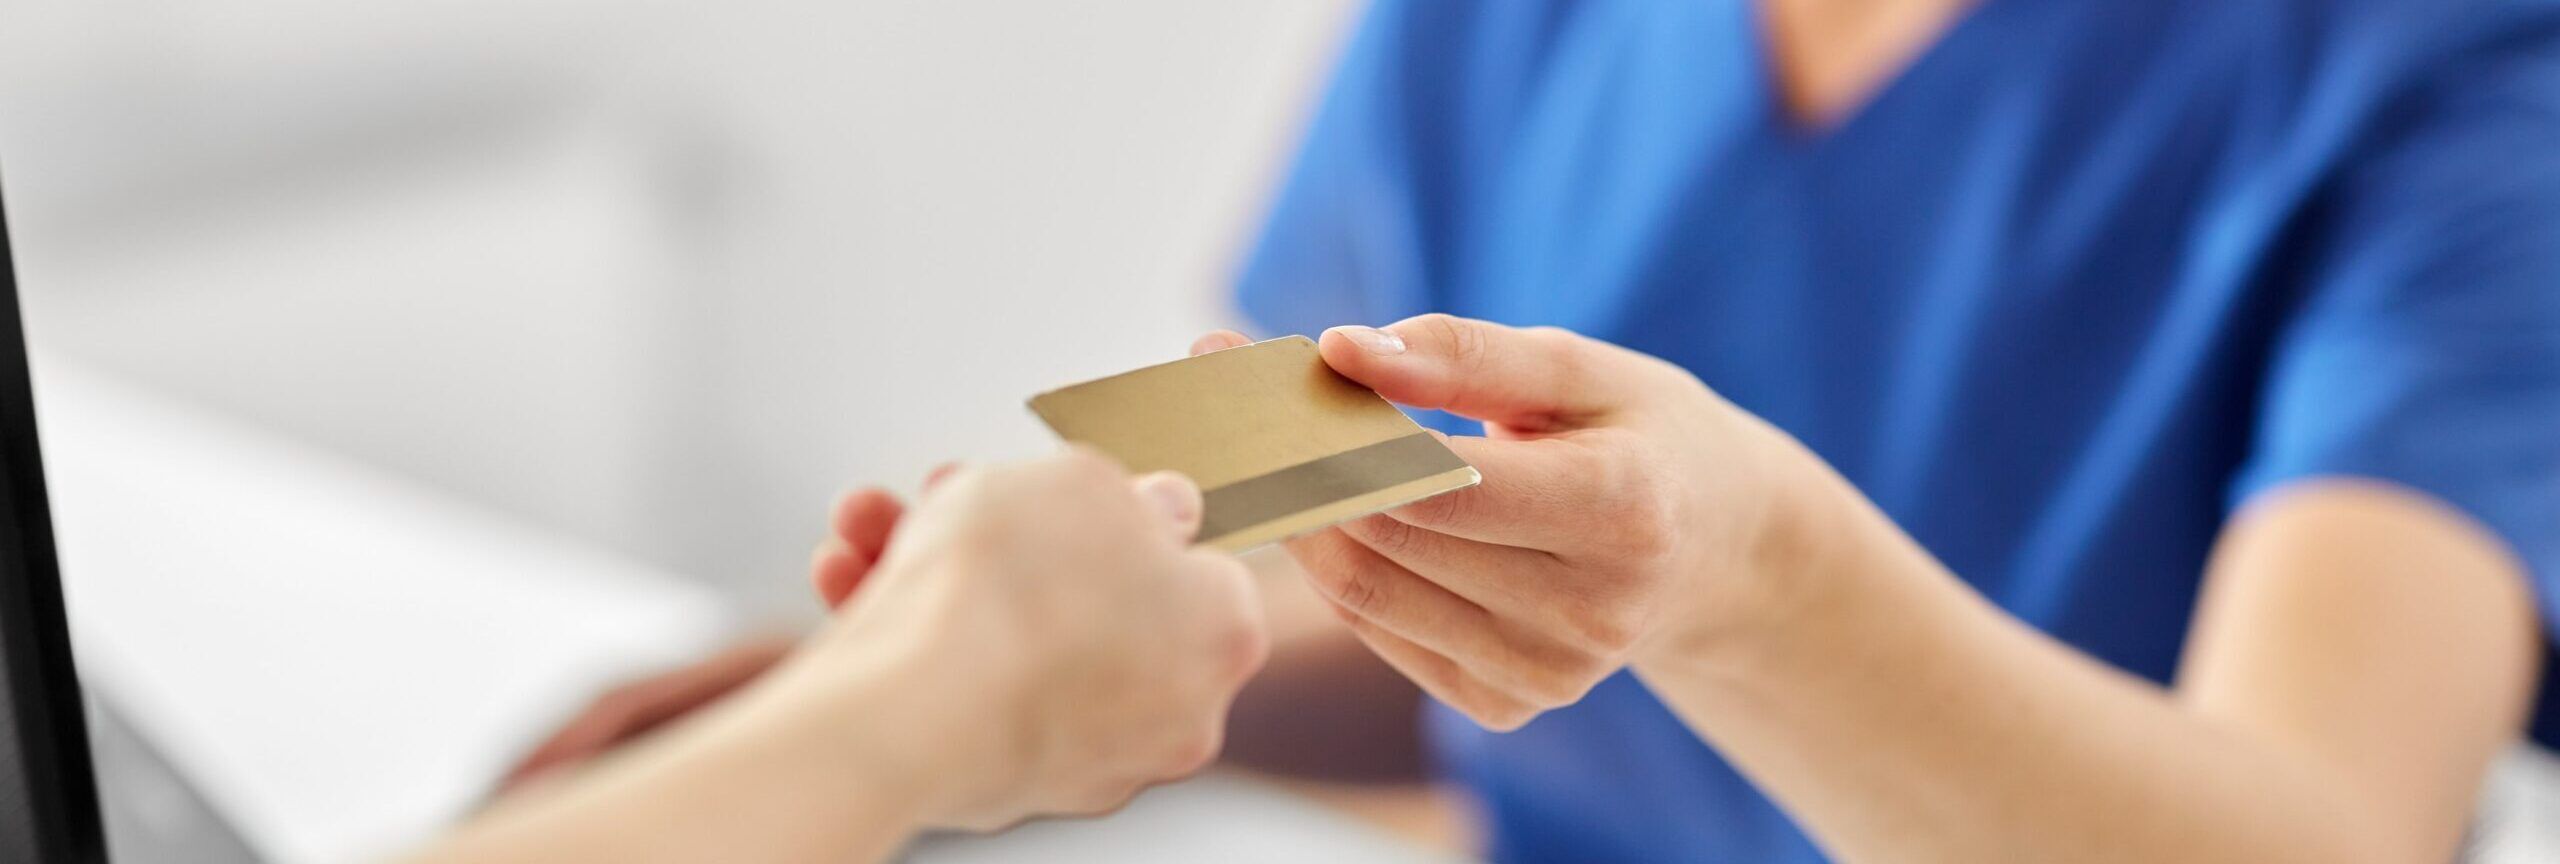 client uses debit card to pay for online treatment